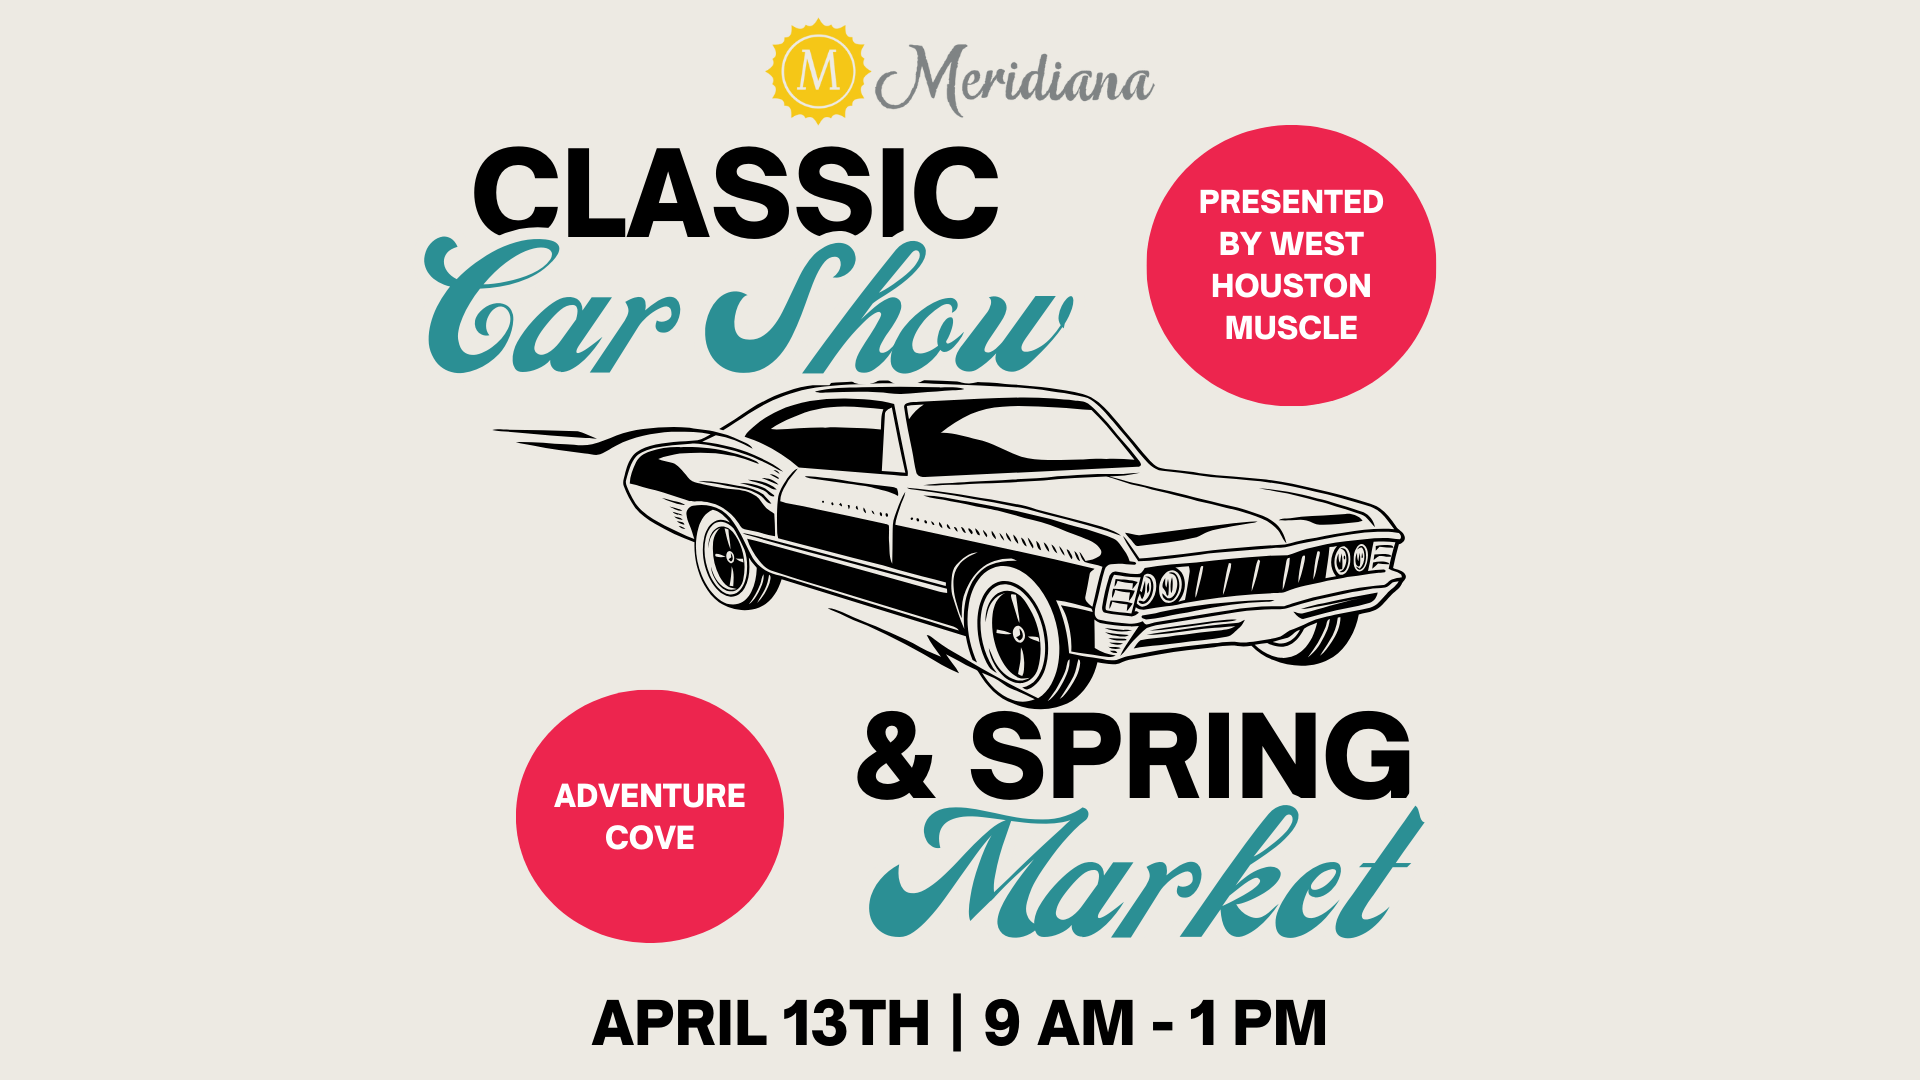 Classic Car Show and Spring Market Returns to Meridiana’s Adventure Cove